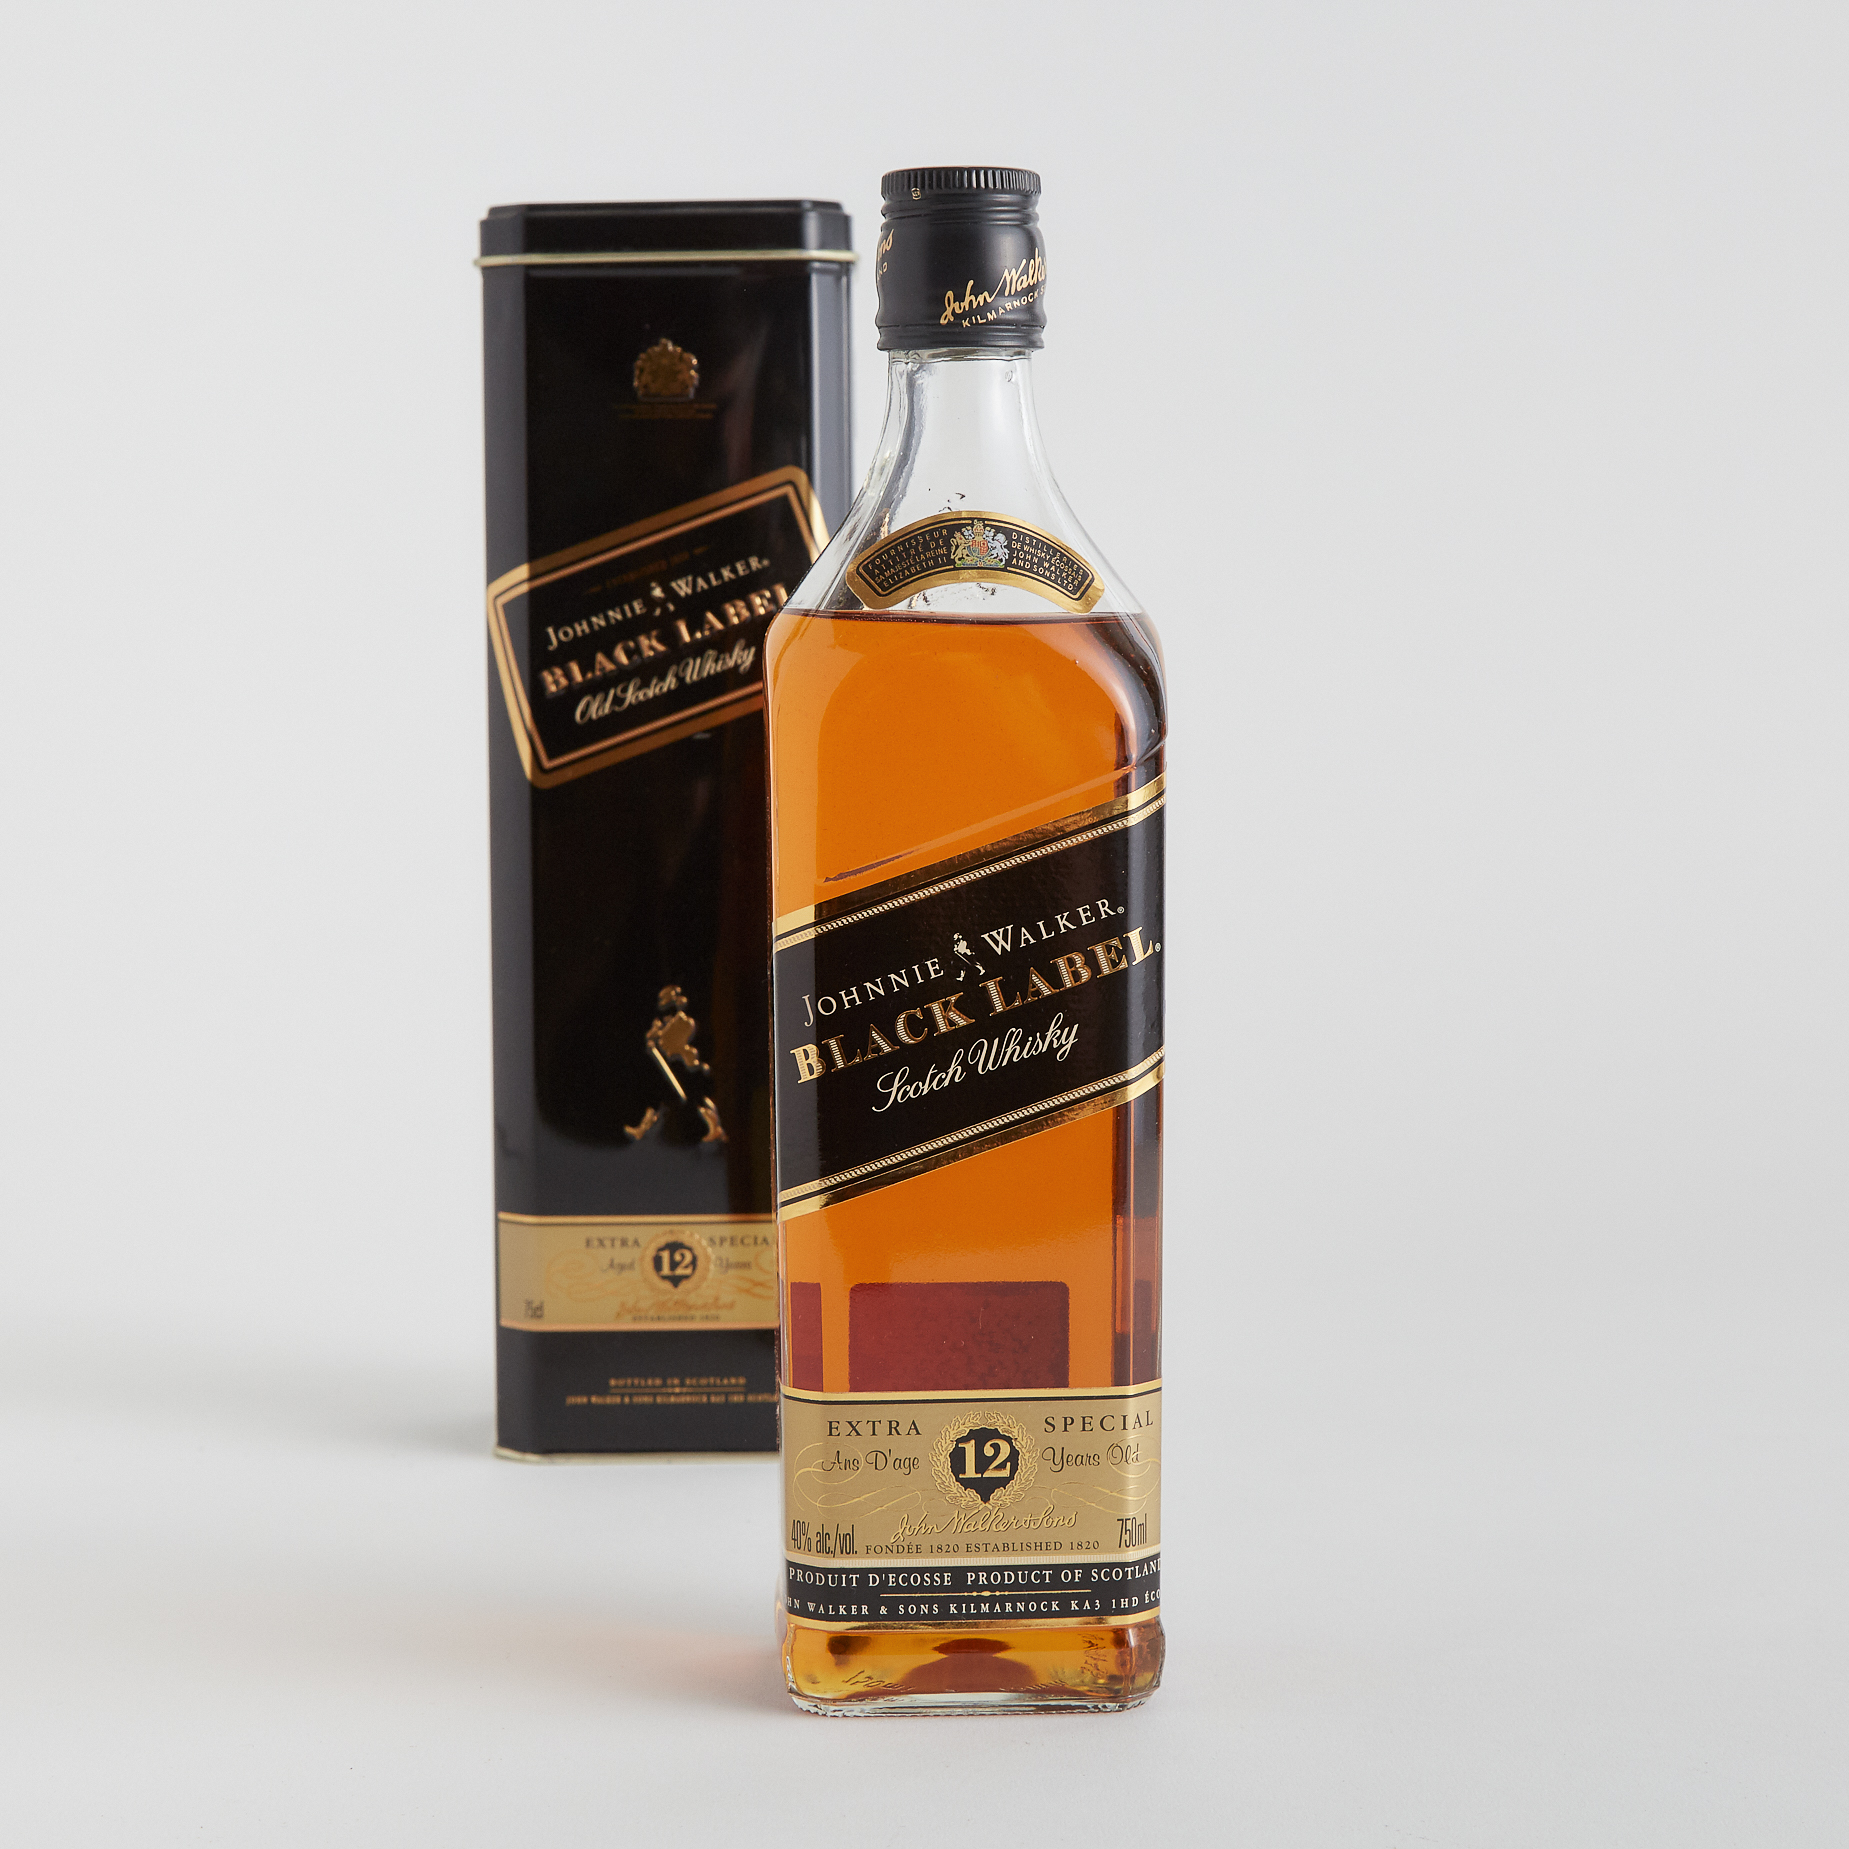 JOHNNIE WALKER BLACK LABEL BLENDED SCOTCH WHISKY 12 YEARS (ONE 750 ML)